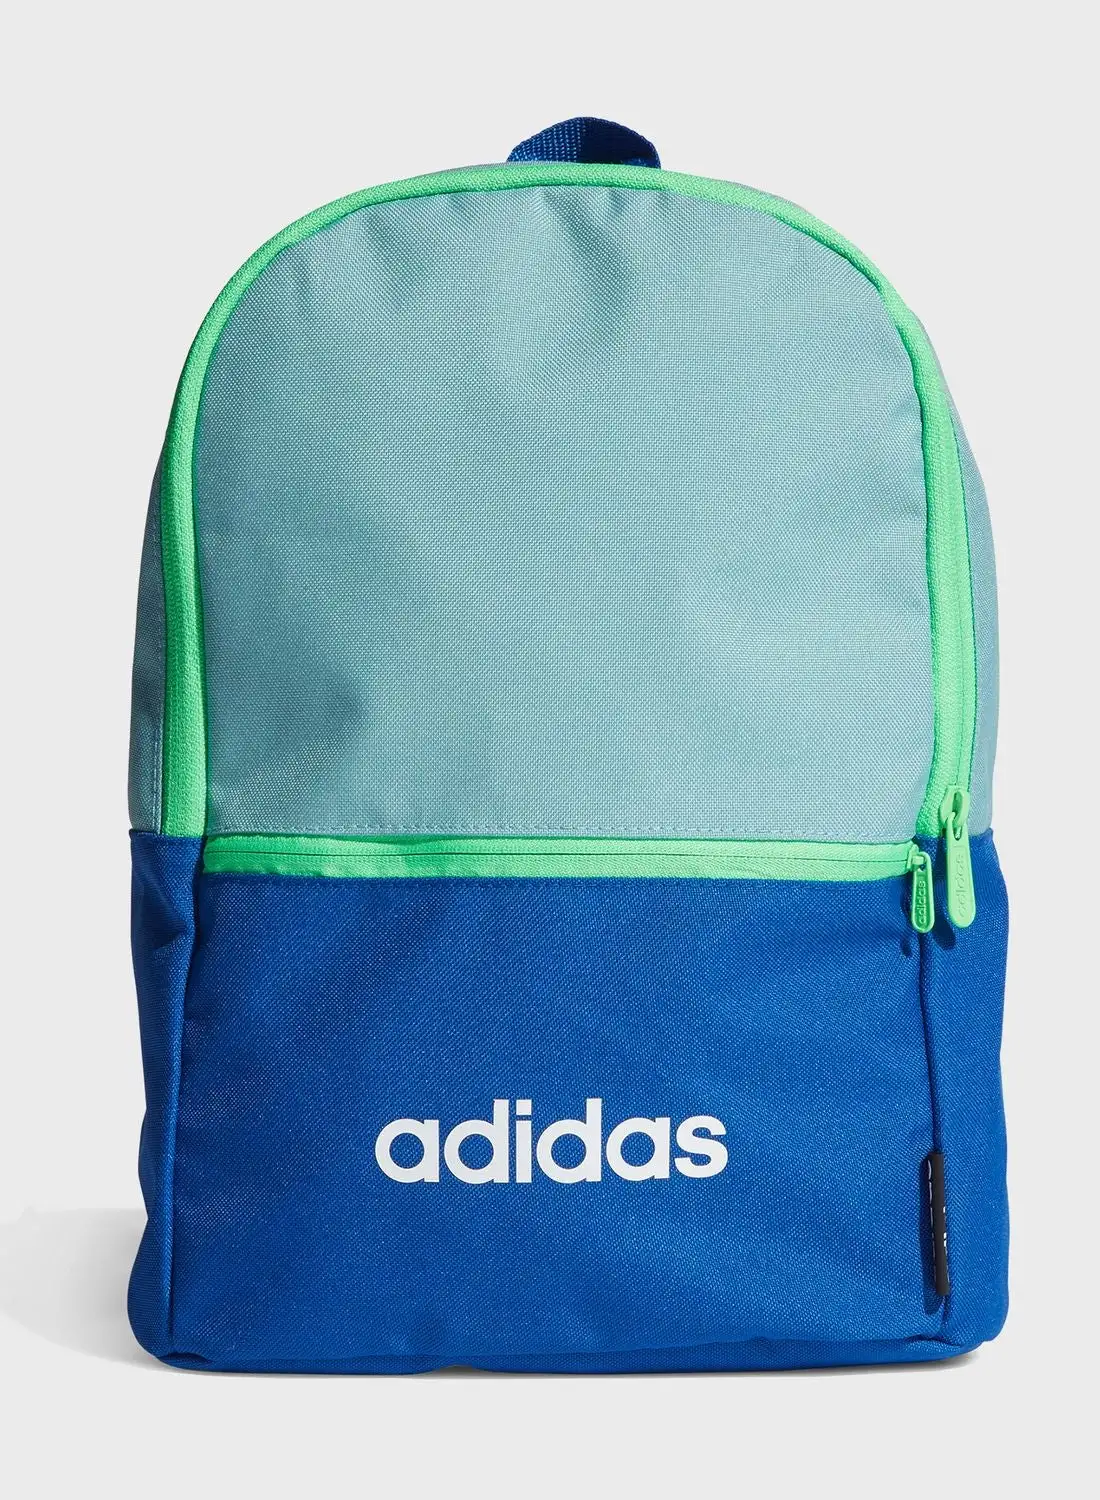 Adidas Classic Backpack